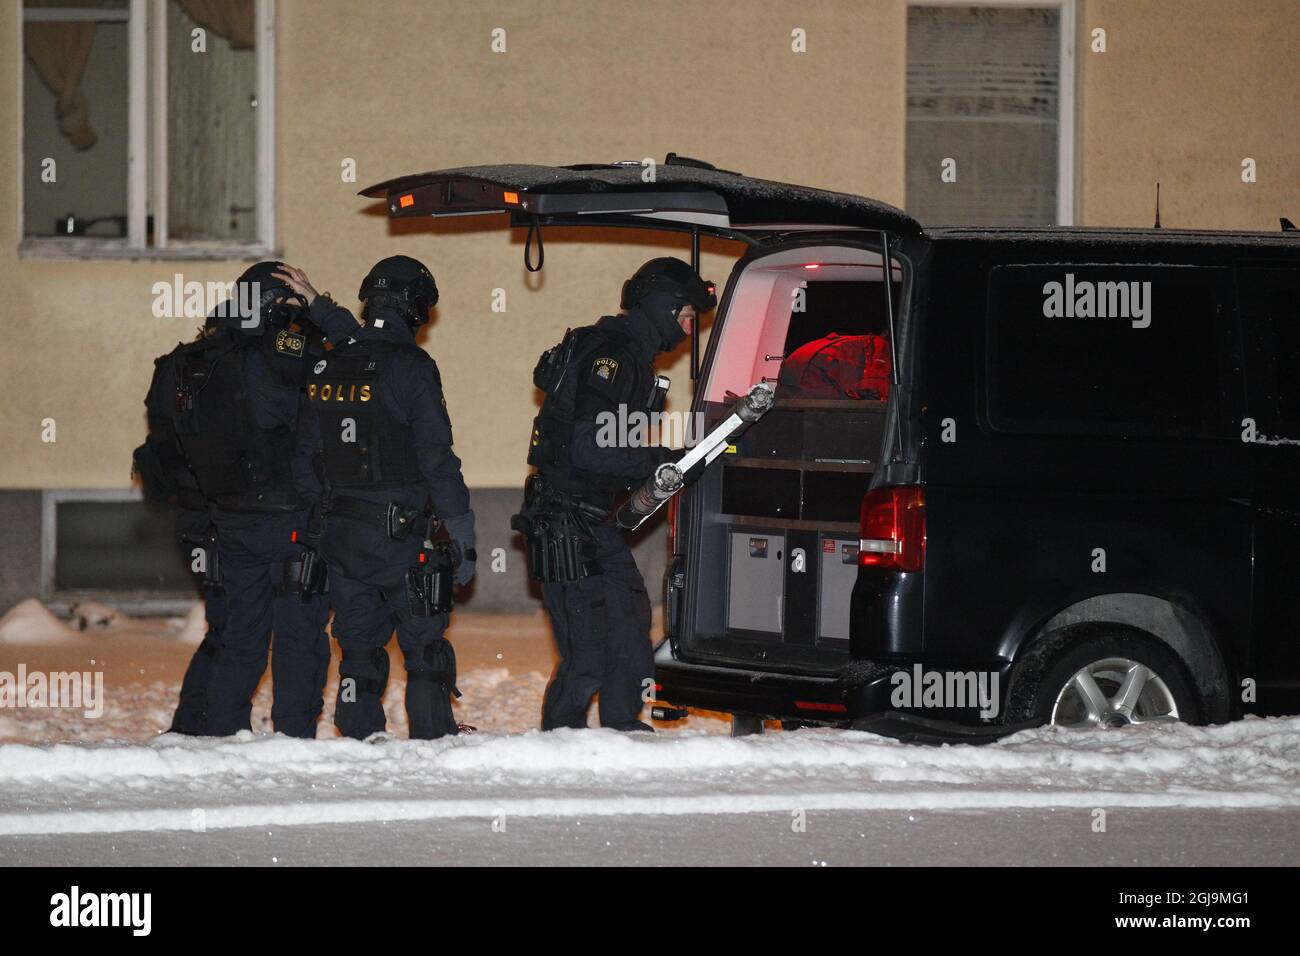 LJUSNE 2016-02-13 Heavily armed police are seen outside an asylum center in Ljusne in northern Sweden February 13, 2016 after a deadly stabbing. One person was killed in the stabbing and three sent to hospital with unknown injuries. Photo: Pernilla Wahlman / TT / kod: 9203  Stock Photo